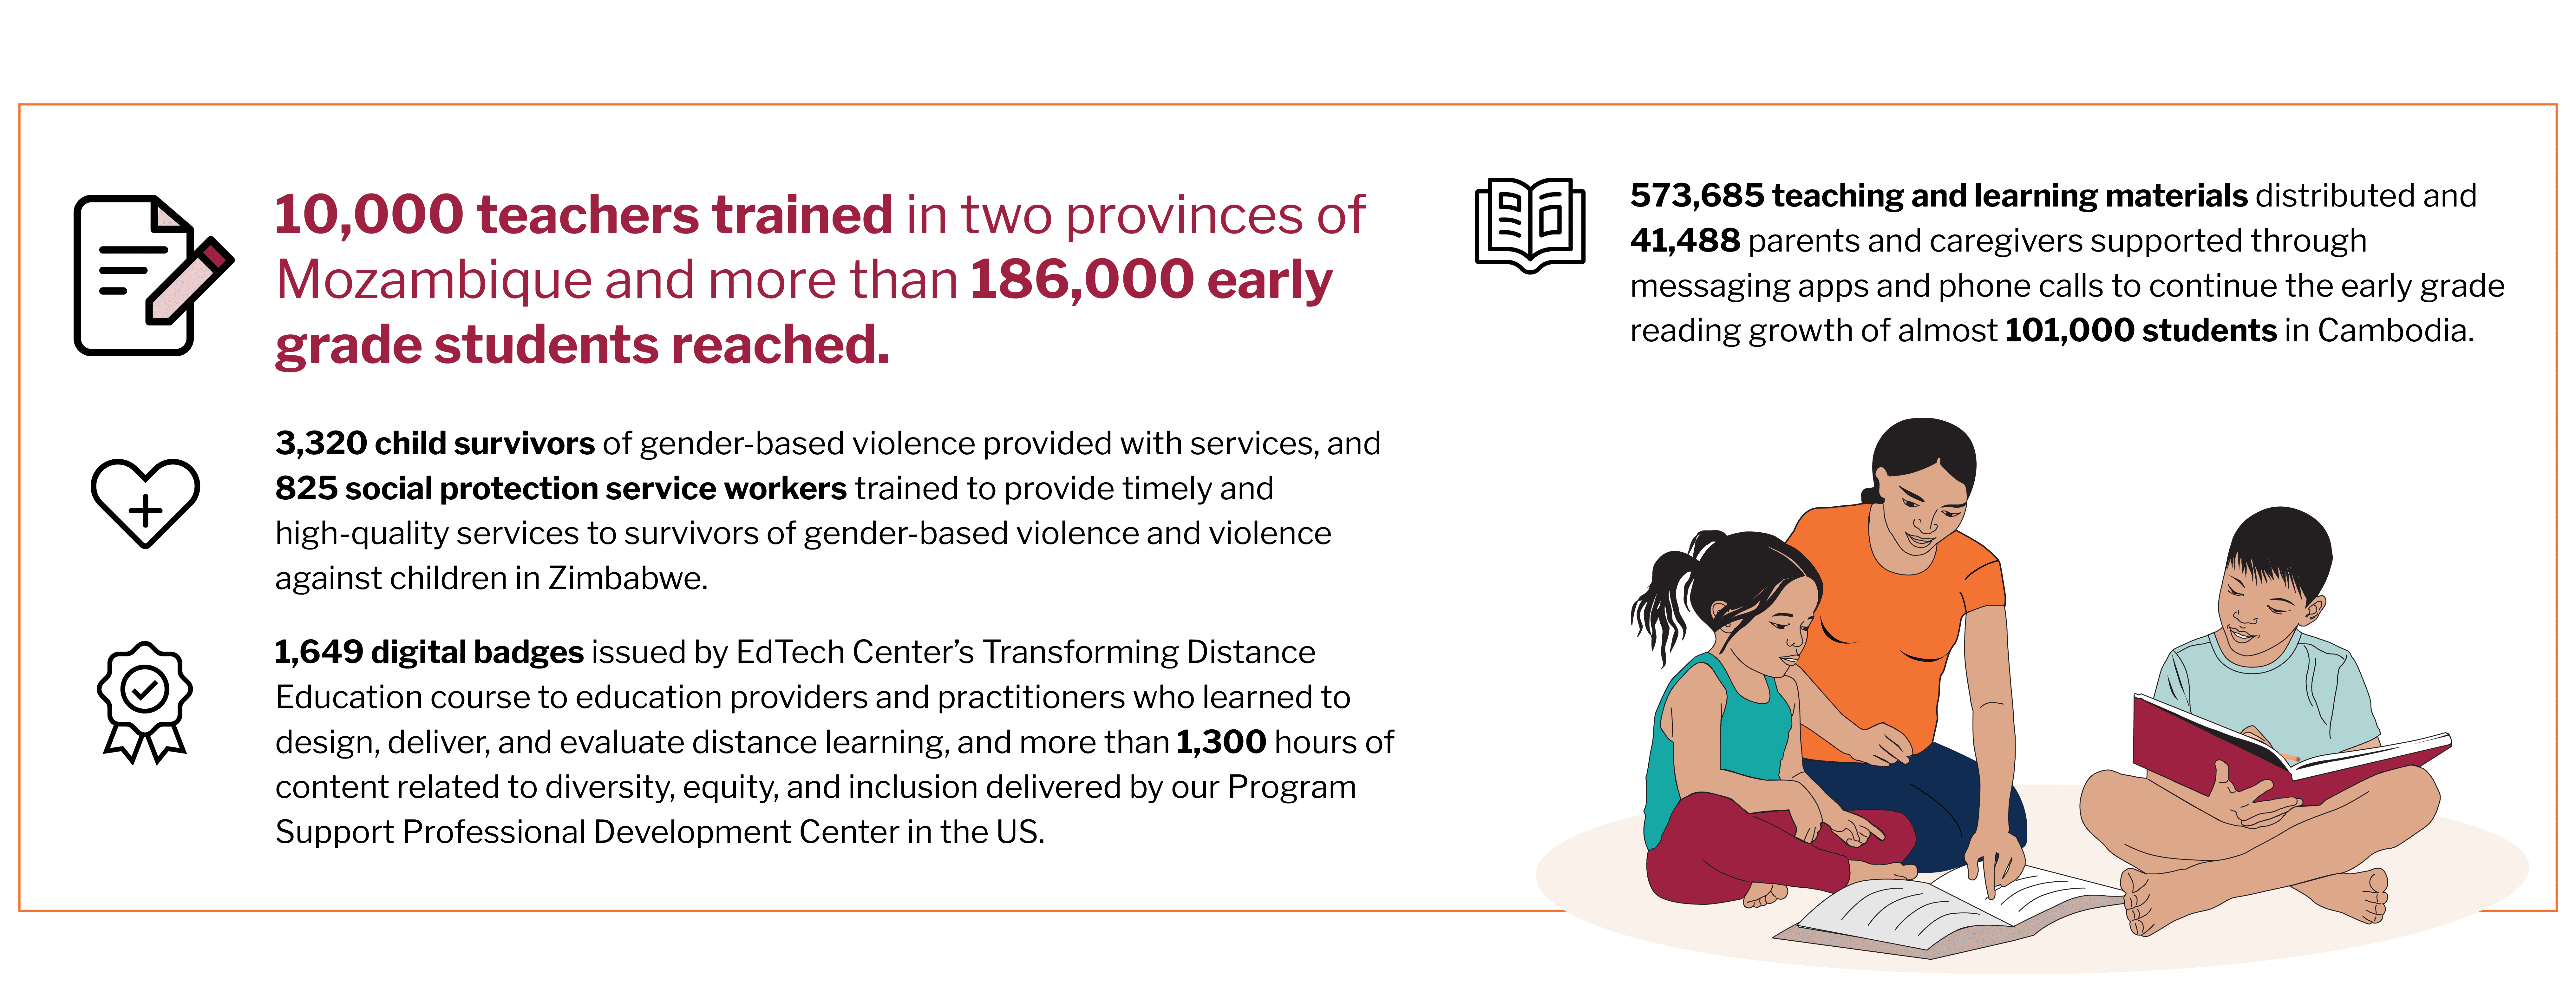 In 2021, World Education trained teachers to reach students with bilingual education, provided services for those affected by gender-based violence, distributed at-home learning materials, and trained adult education professionals in distance learning instruction and diversity, equity, and inclusion.